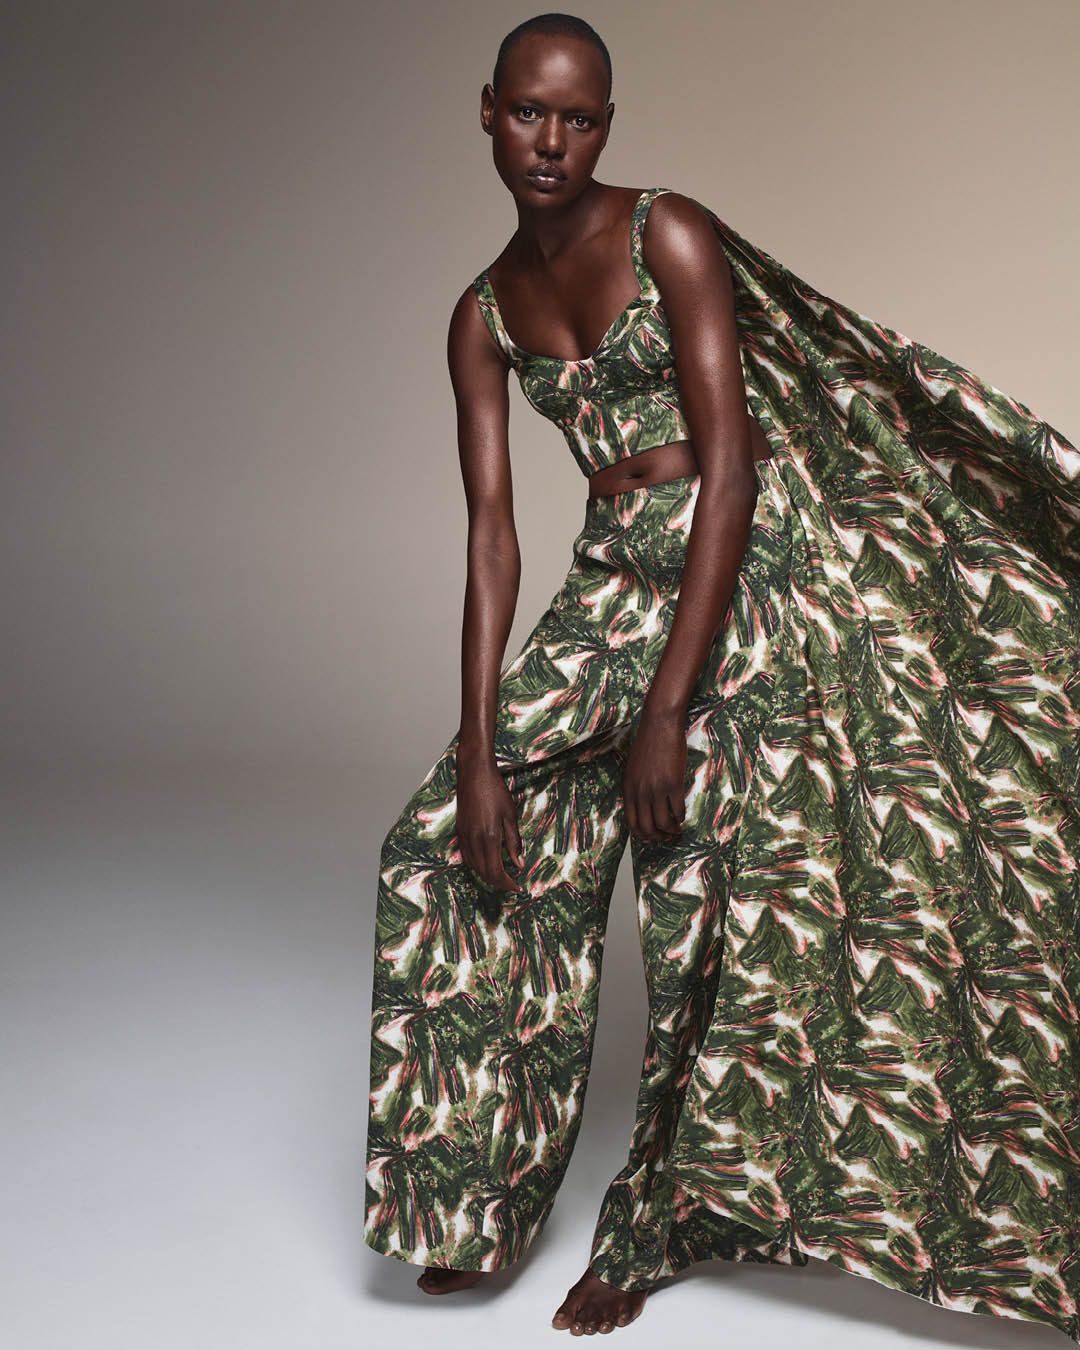 Ajak Deng leaning over wearing a matching green tropical print bustier and trousers